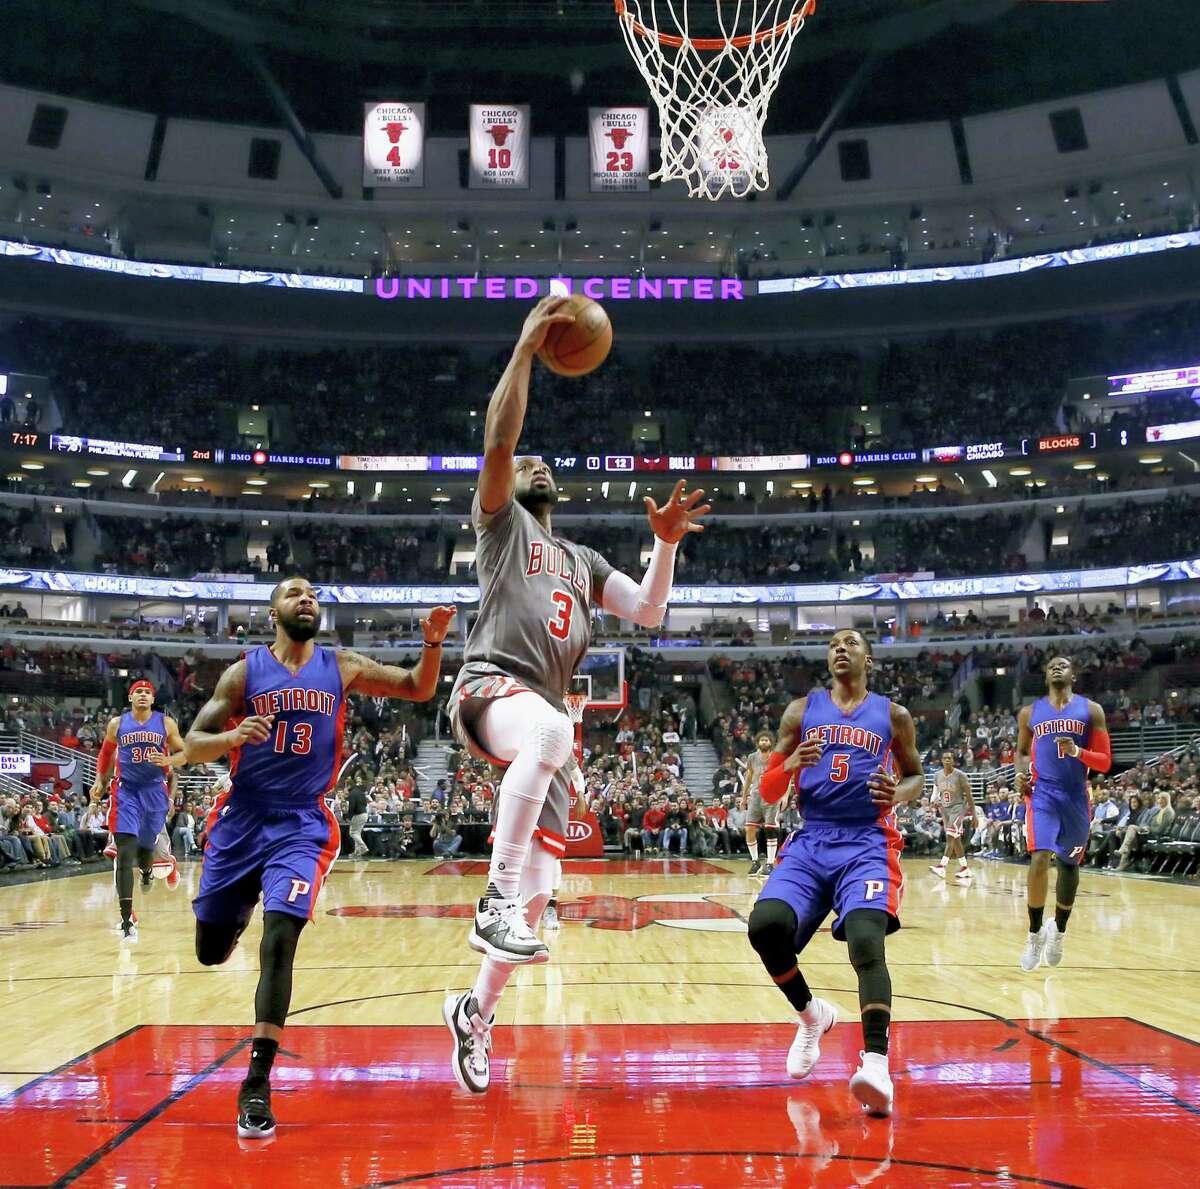 Chicago Bulls’ Dwyane Wade (3) scores past Detroit Pistons’ Marcus Morris (13) and Kentavious Caldwell-Pope during the first half of an NBA basketball game Monday, Dec. 19, 2016 in Chicago.